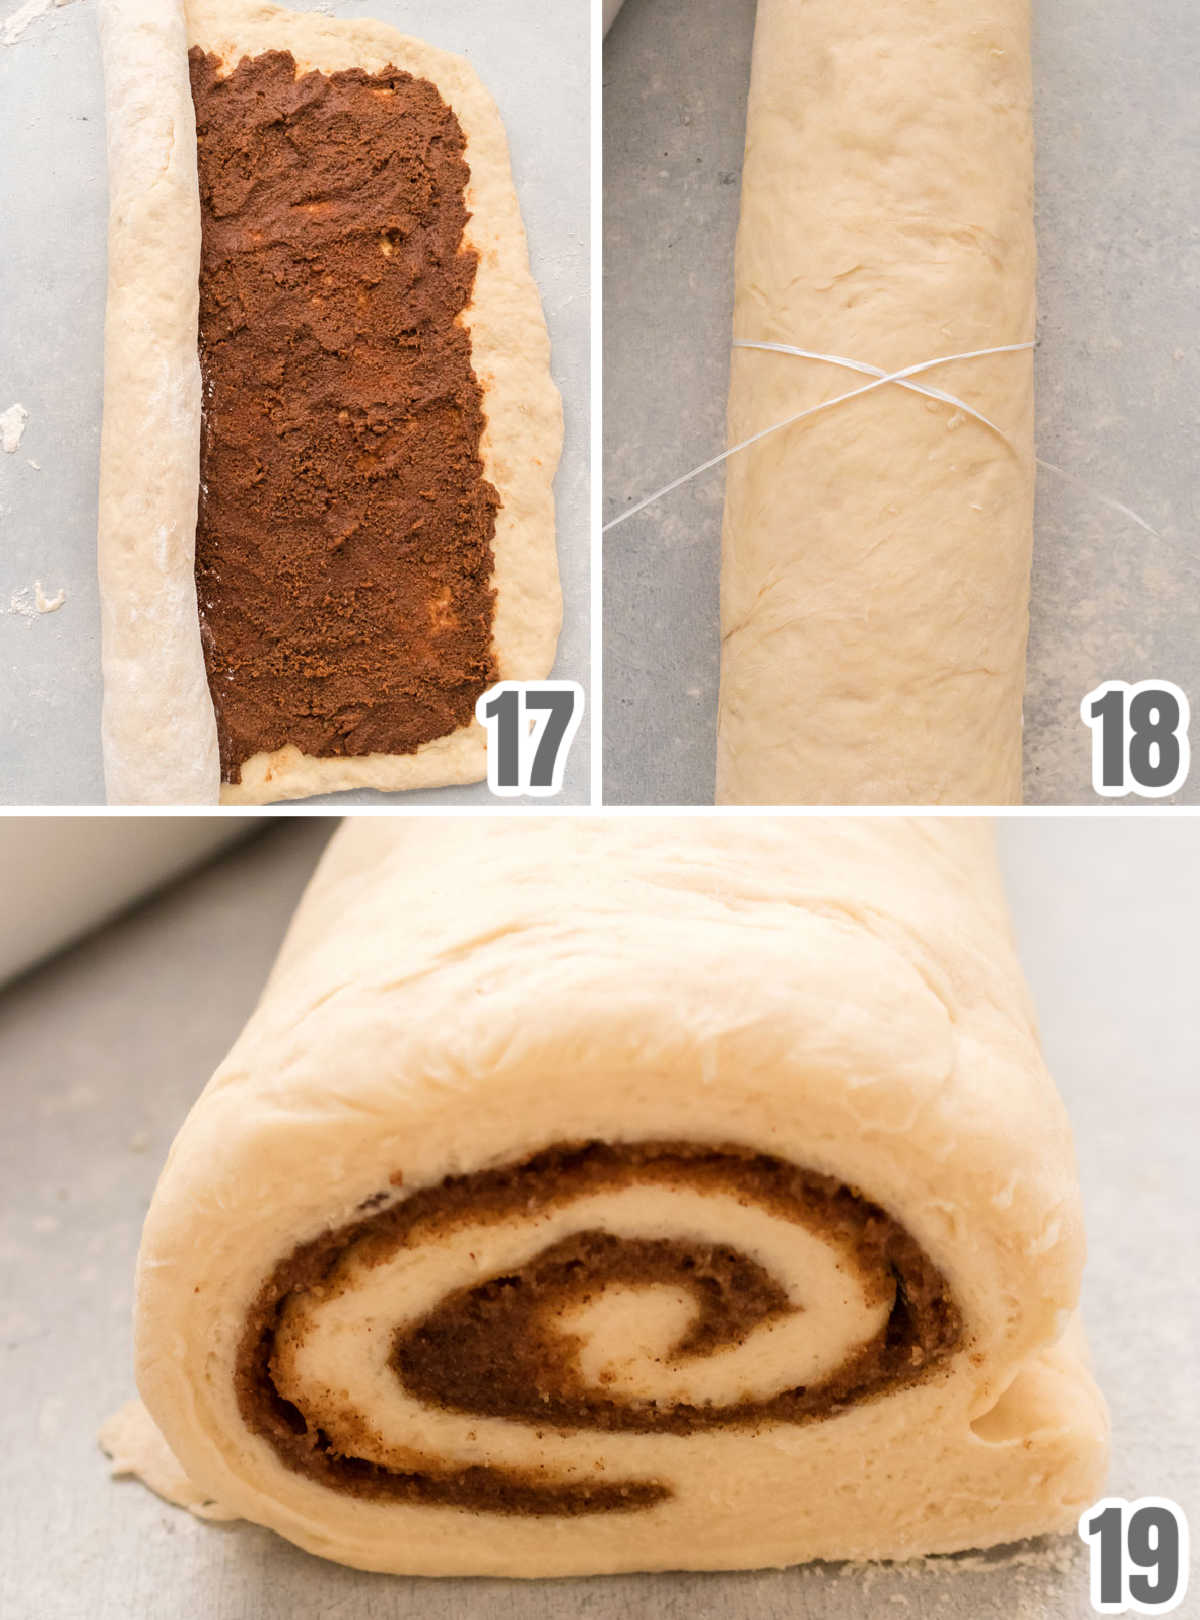 Collage image showing the steps for rolling the cinnamon roll dough and slicing into pieces.